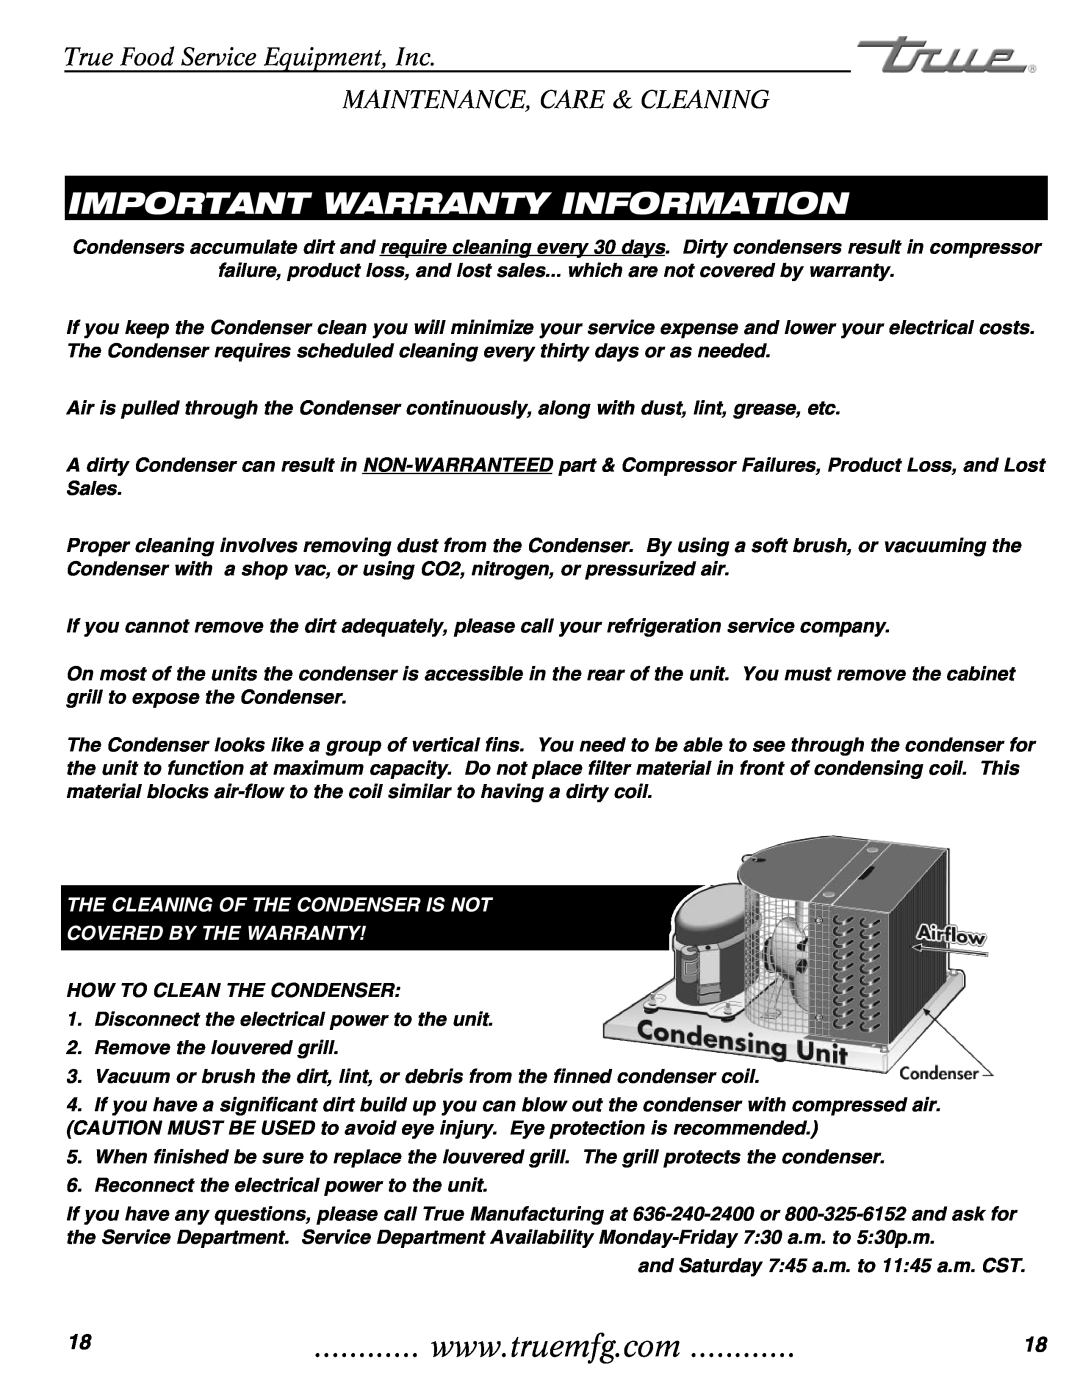 True Manufacturing Company T-35 Important Warranty Information, True Food Service Equipment, Inc, Covered By The Warranty 